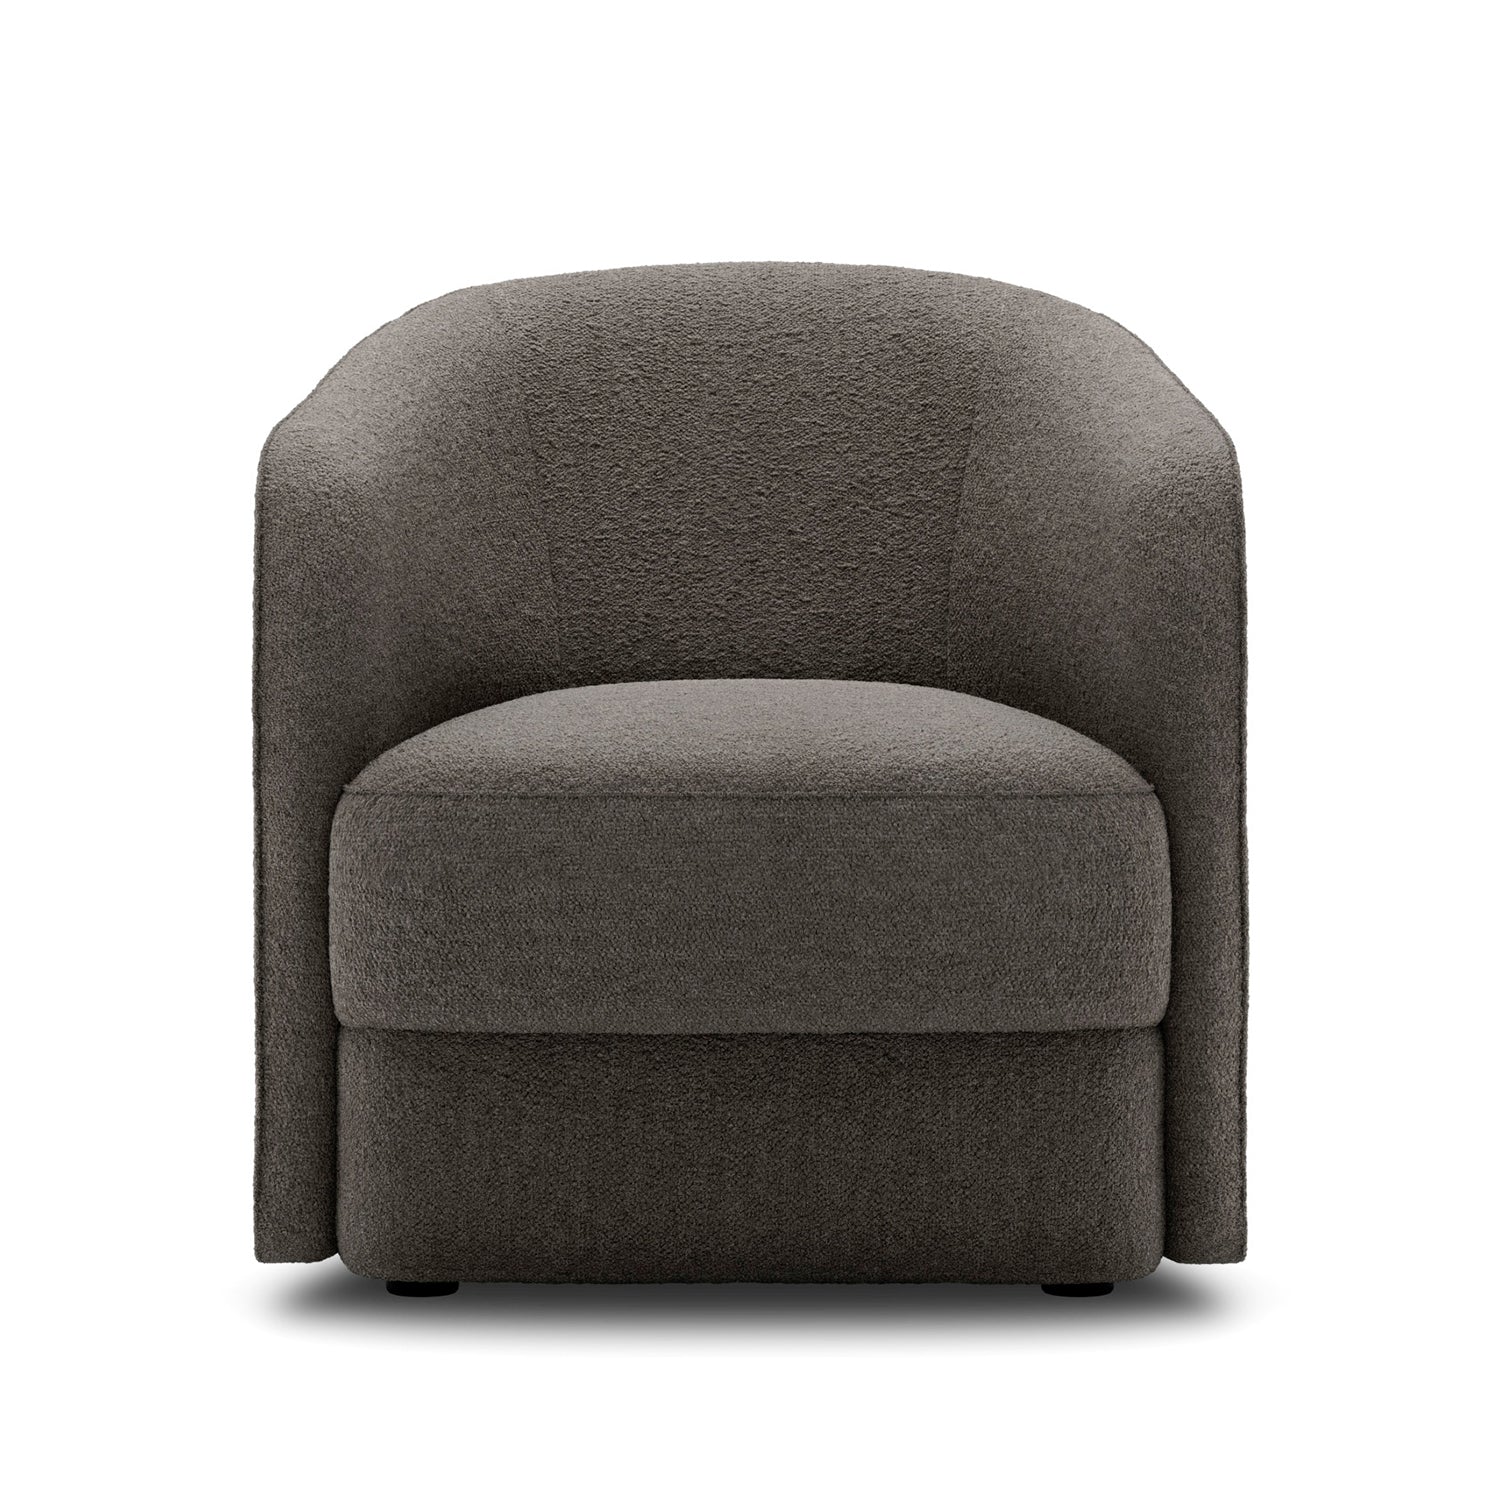 New Works Covent Lounge Chair Narrow in dark taupe